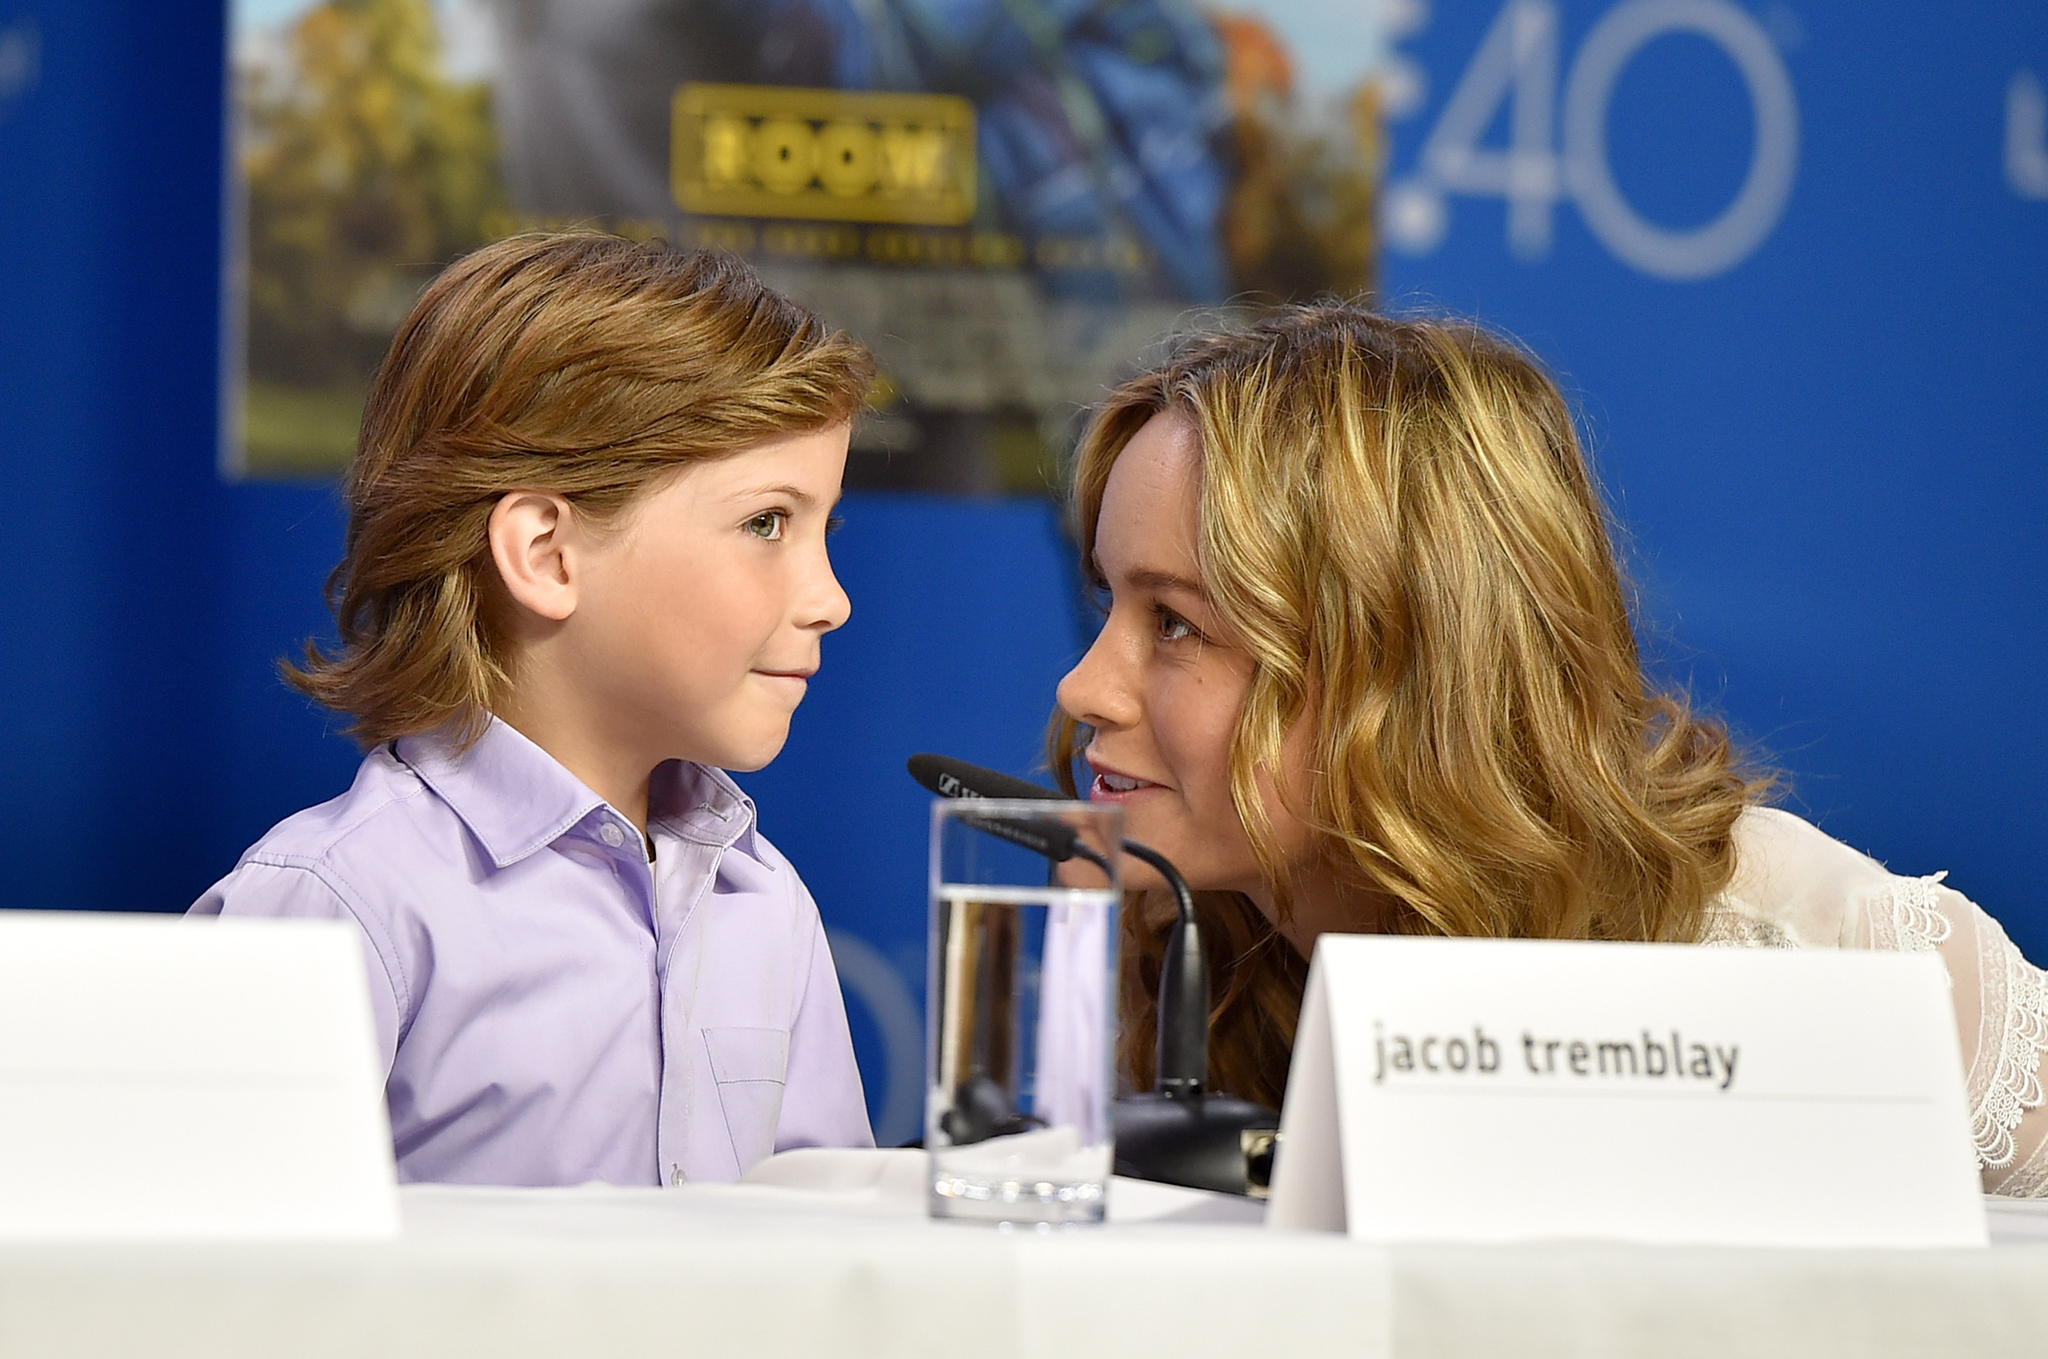 Brie Larson and Jacob Tremblay at event of Room (2015)